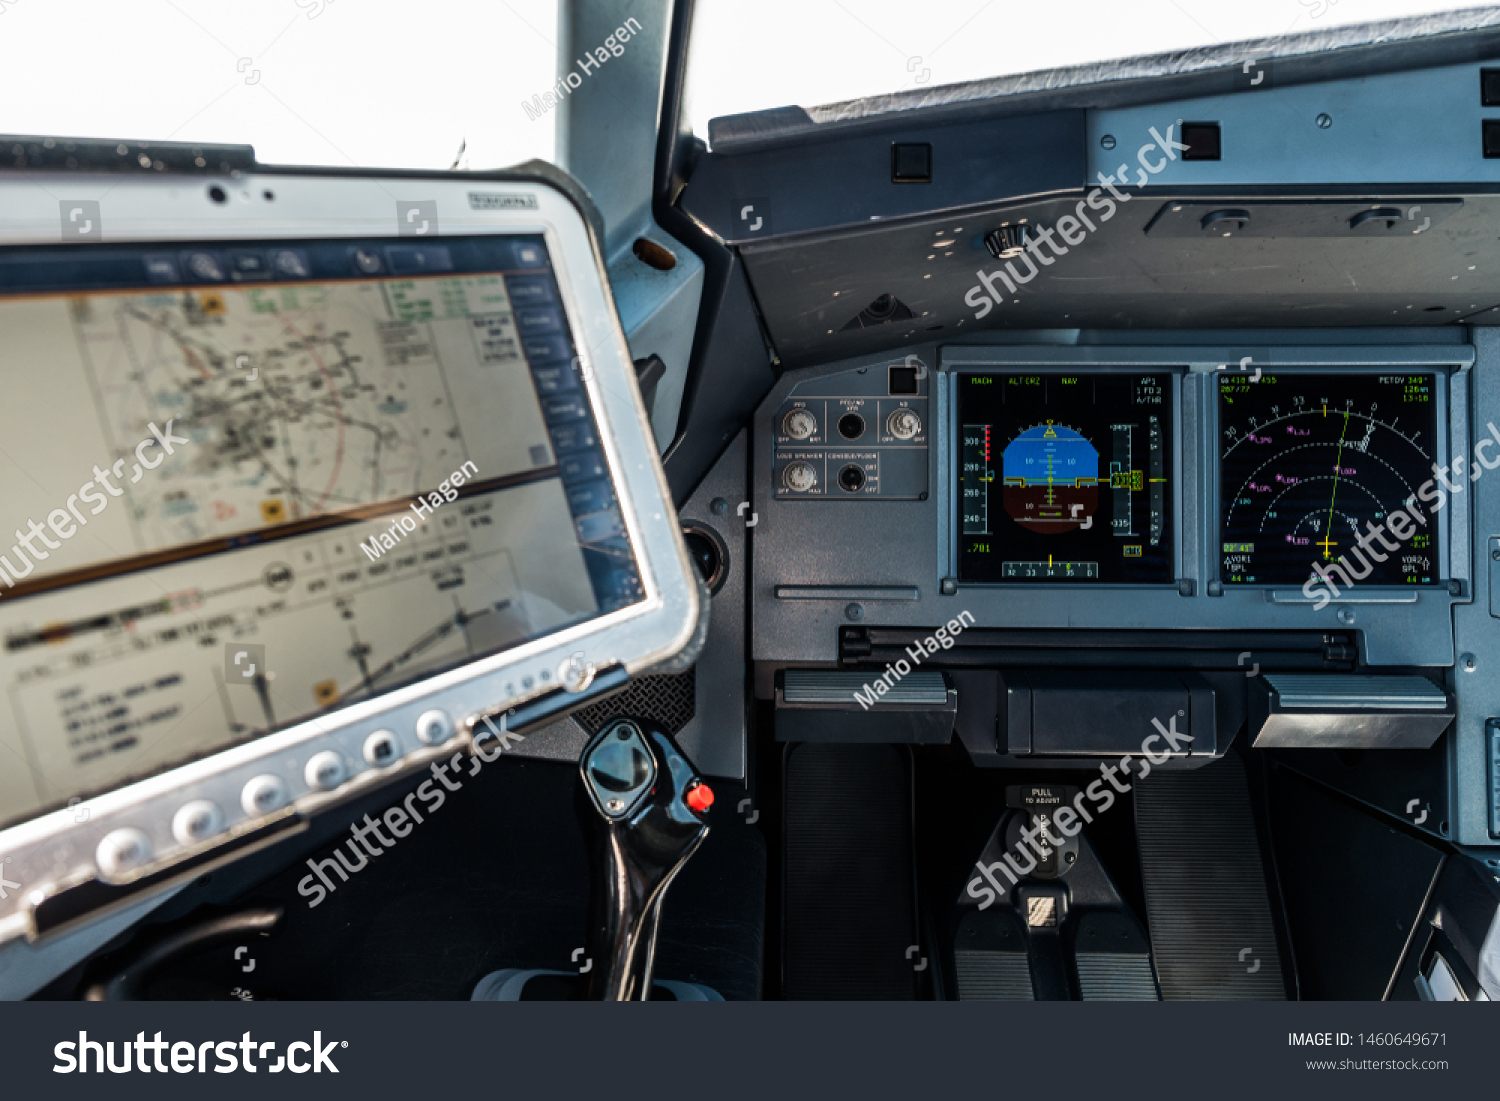 Airplane Cockpit, Captain site with the Primary Flight Display and navigation display in front and the computer with navigational charts just above the side stick  #1460649671